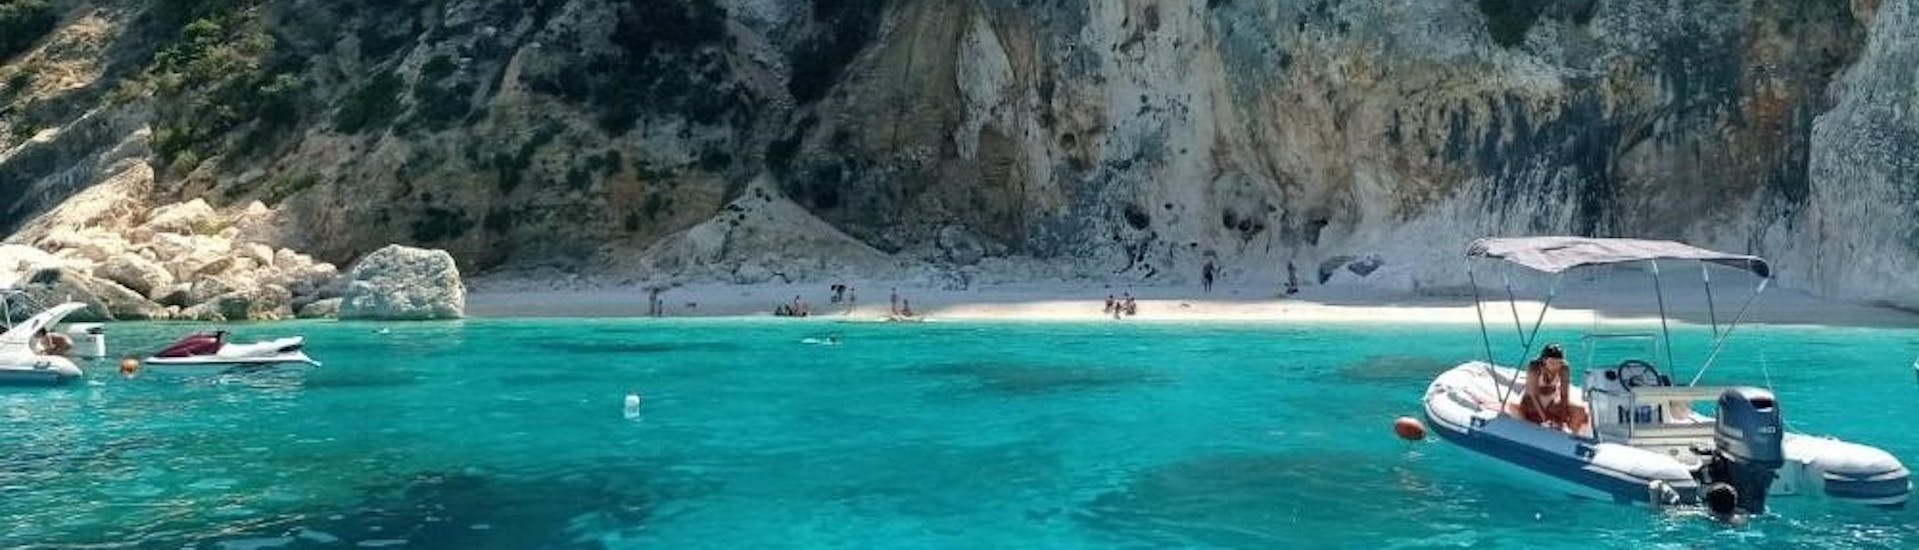 View of one of the beaches that you can reach with the RIB Boat Rental in Capo Coda Cavallo (up to 6 people) with Salimar San Teodoro.